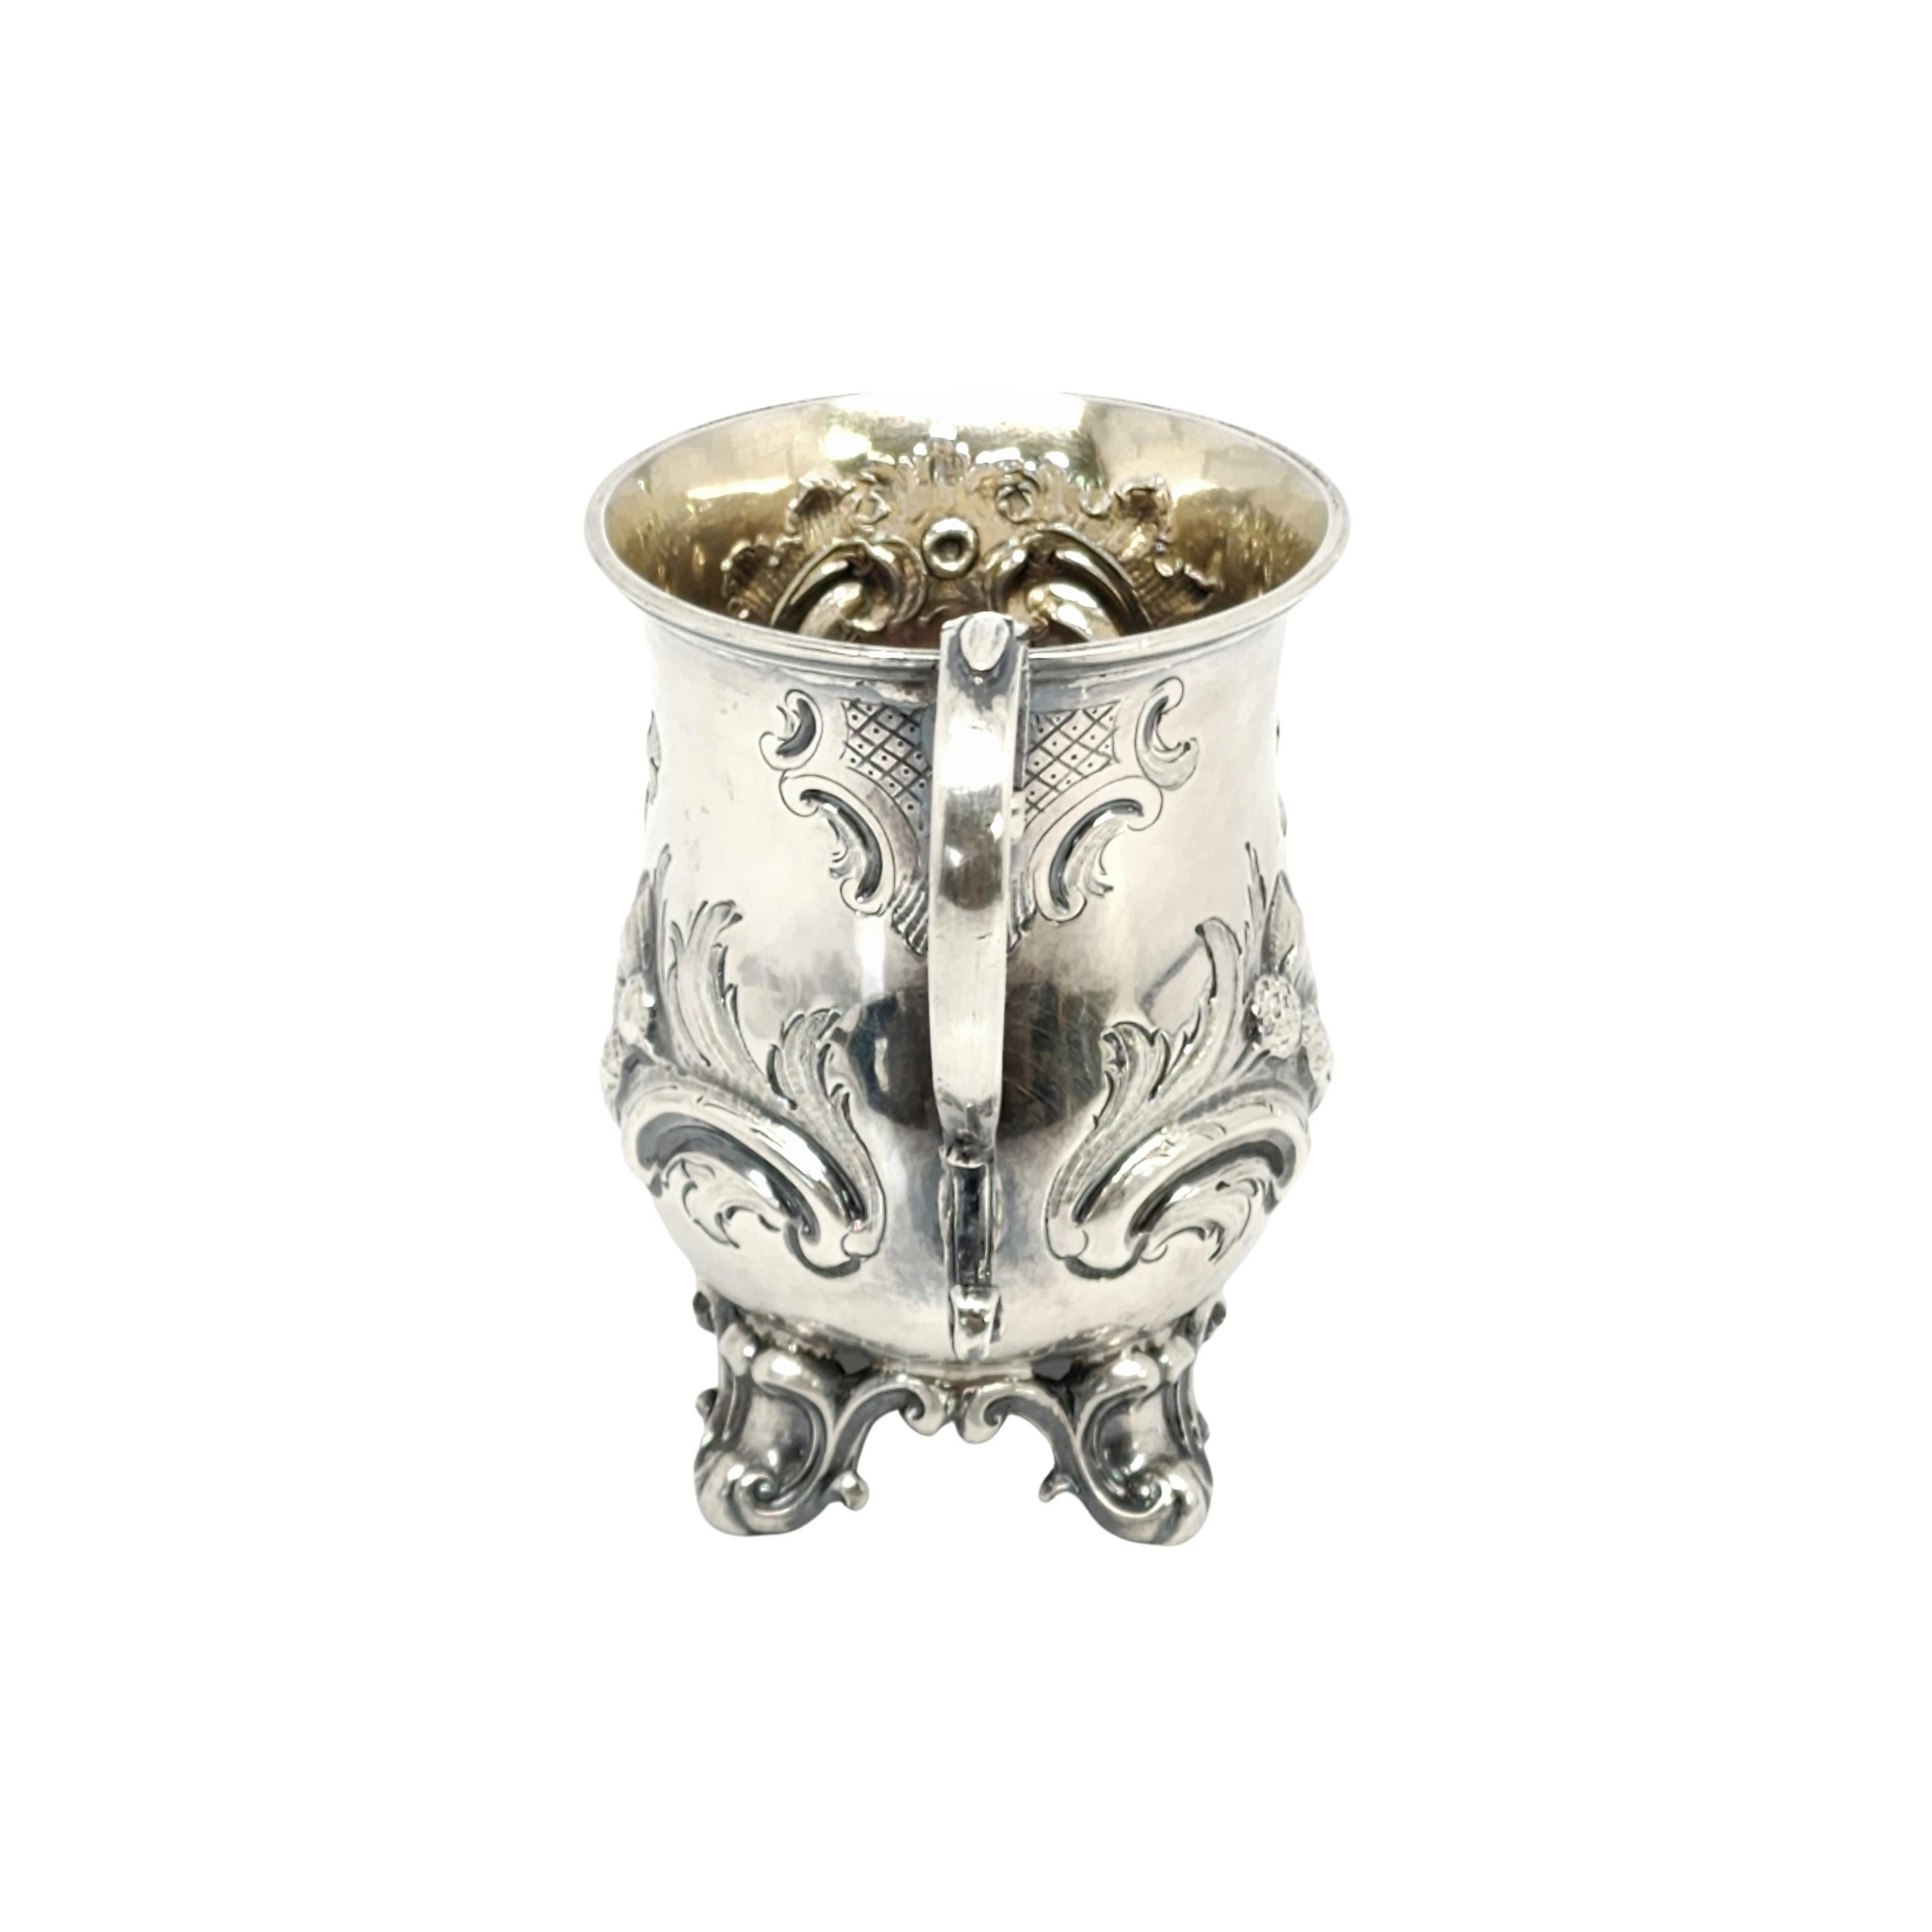 Antique George Angell London England Sterling Silver Footed Cup with Monogram For Sale 2